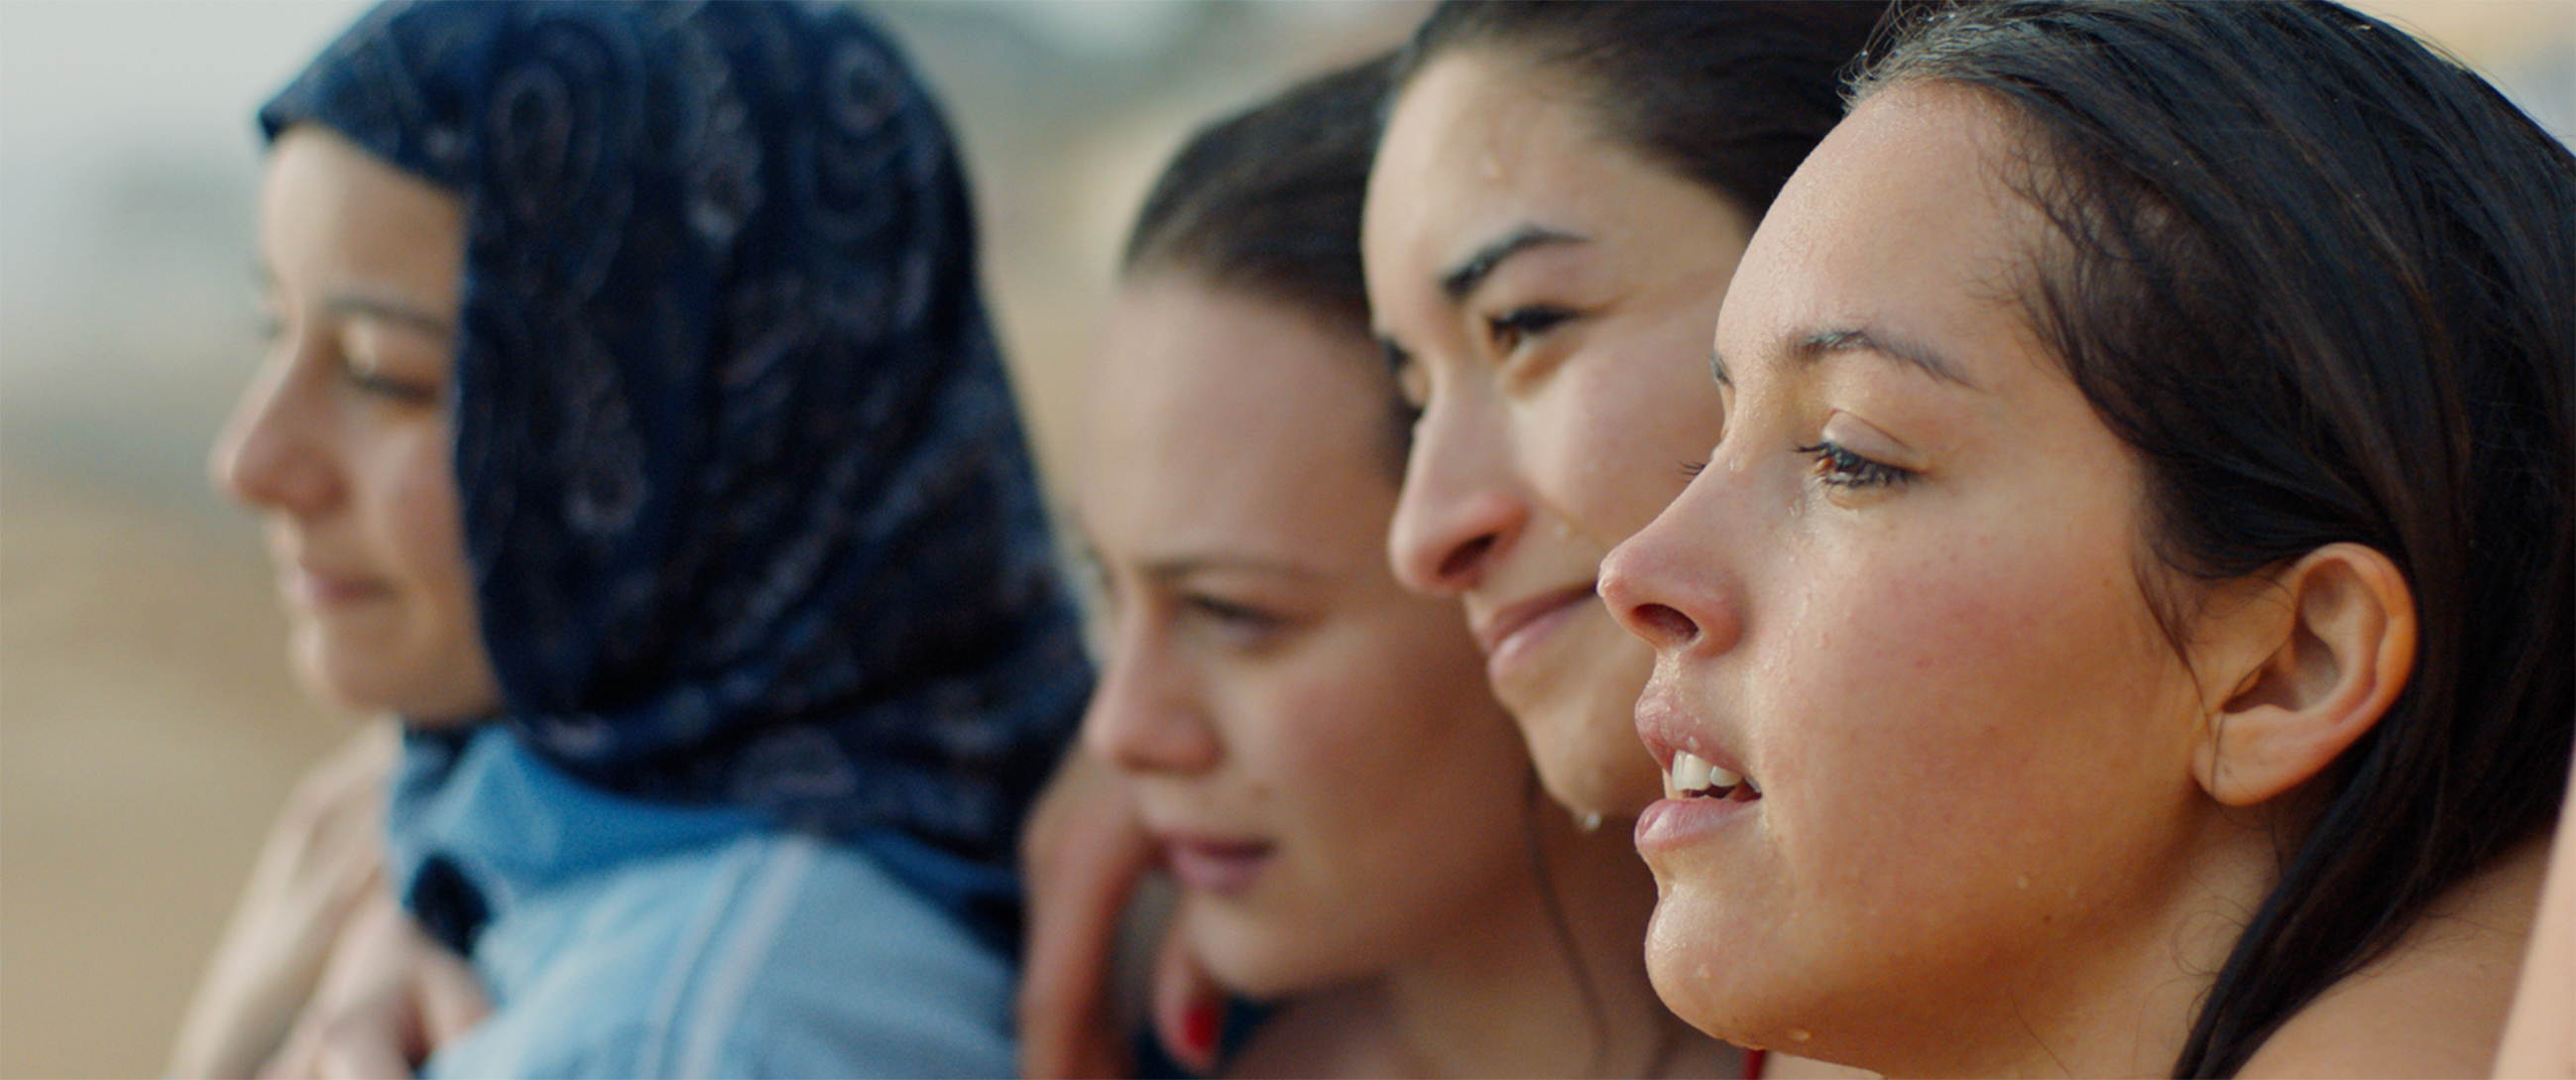 Still from the film Papicha showing four women